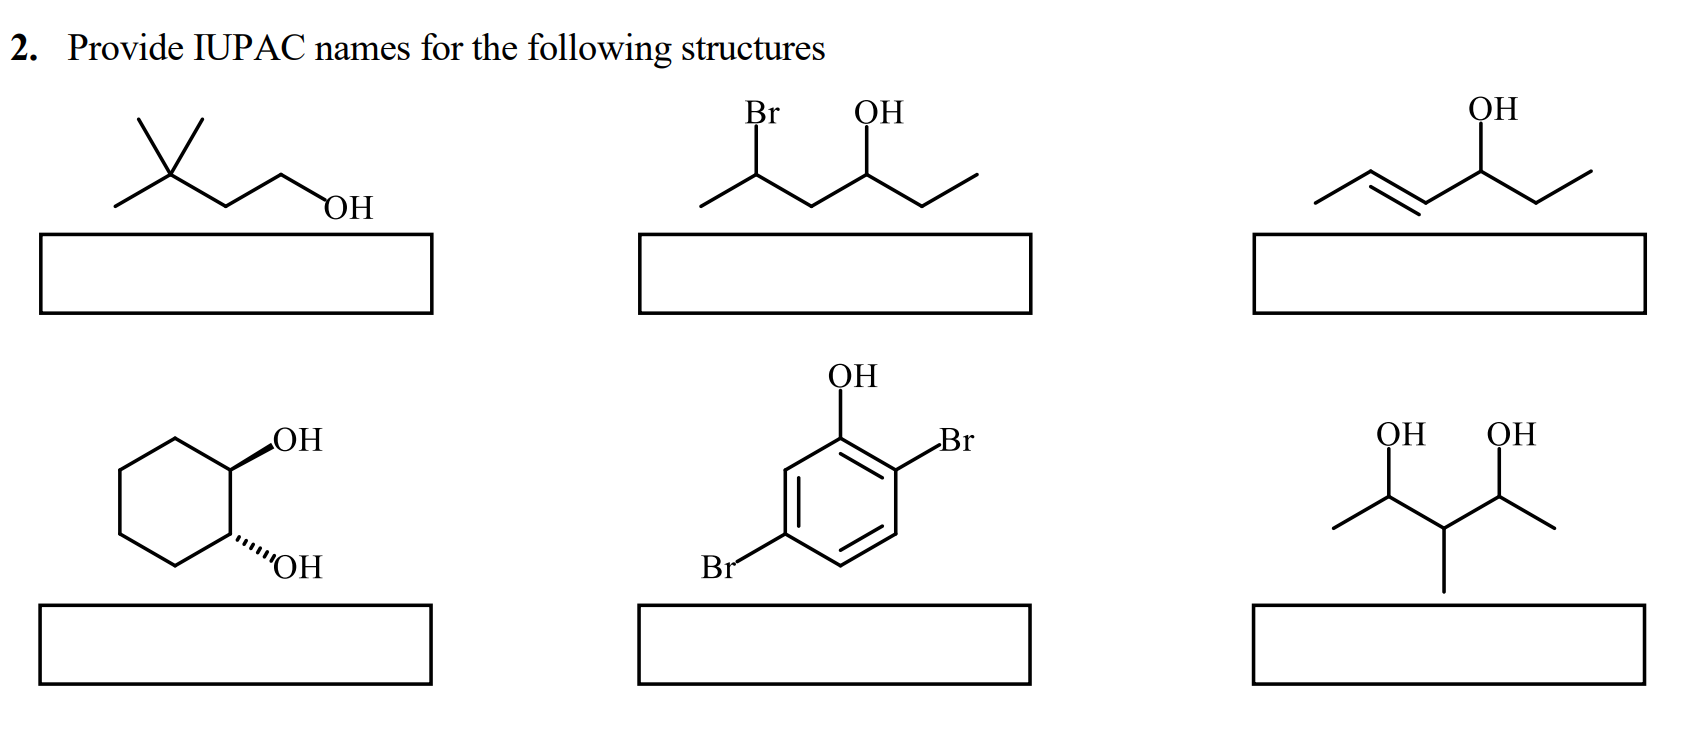 Provide IUPAC names for the following structures
Br
QH
QH
DH
